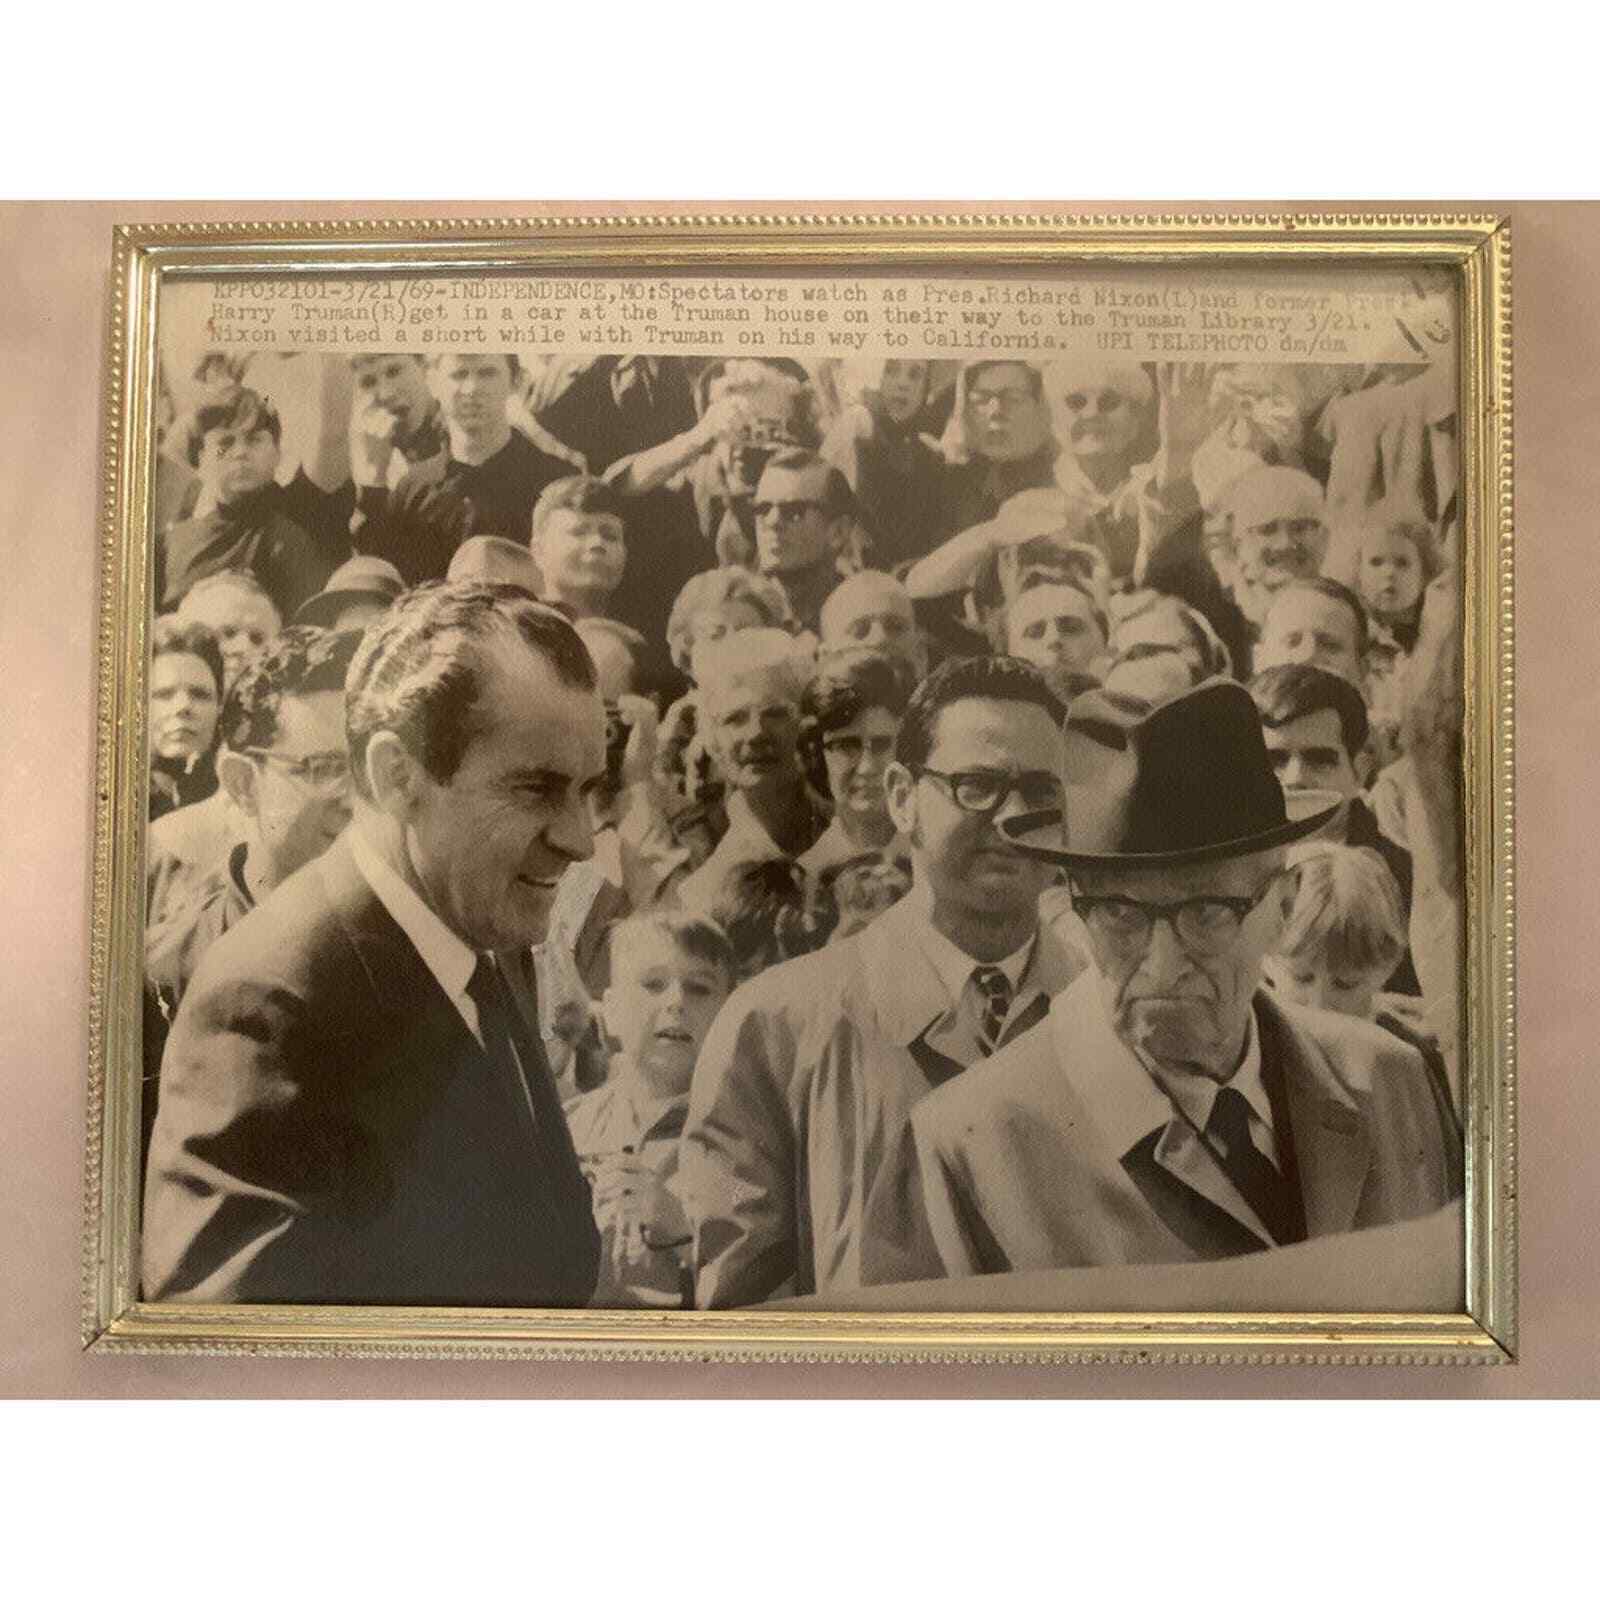 1969 Framed picture of president Nixon and Harry Truman